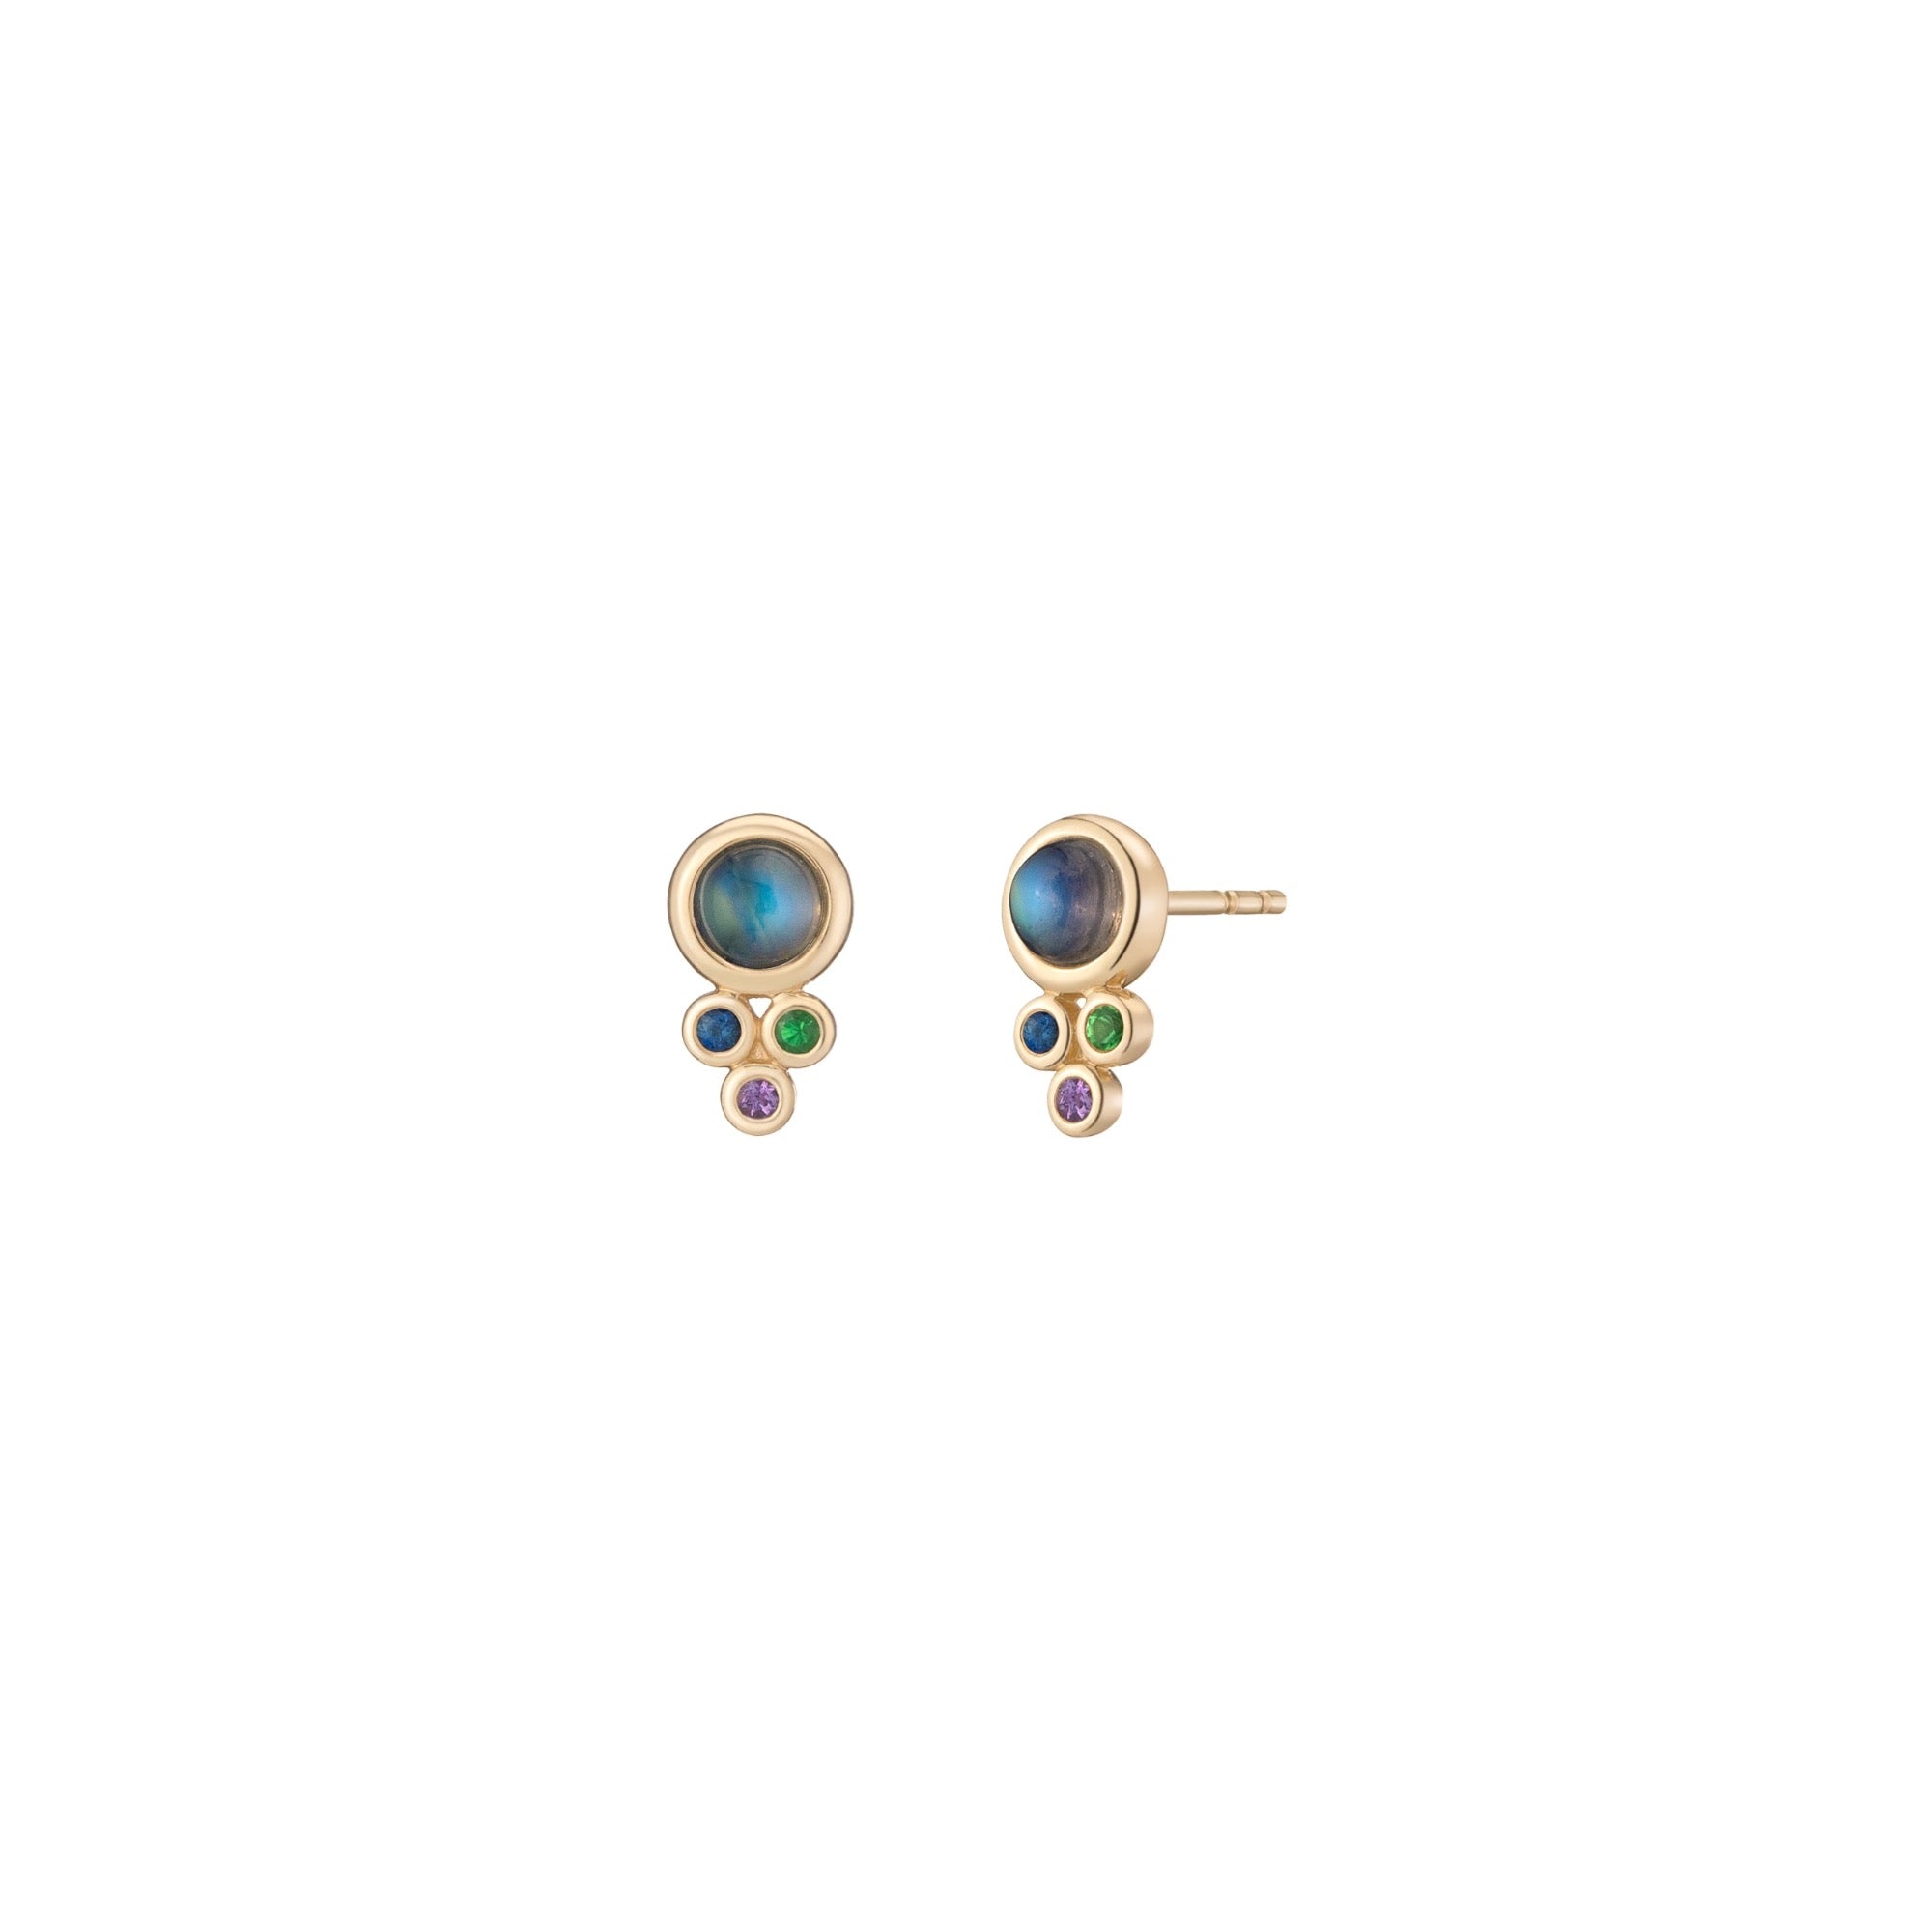 Mined + Found Earrings trio studs, moonstone + cool mix